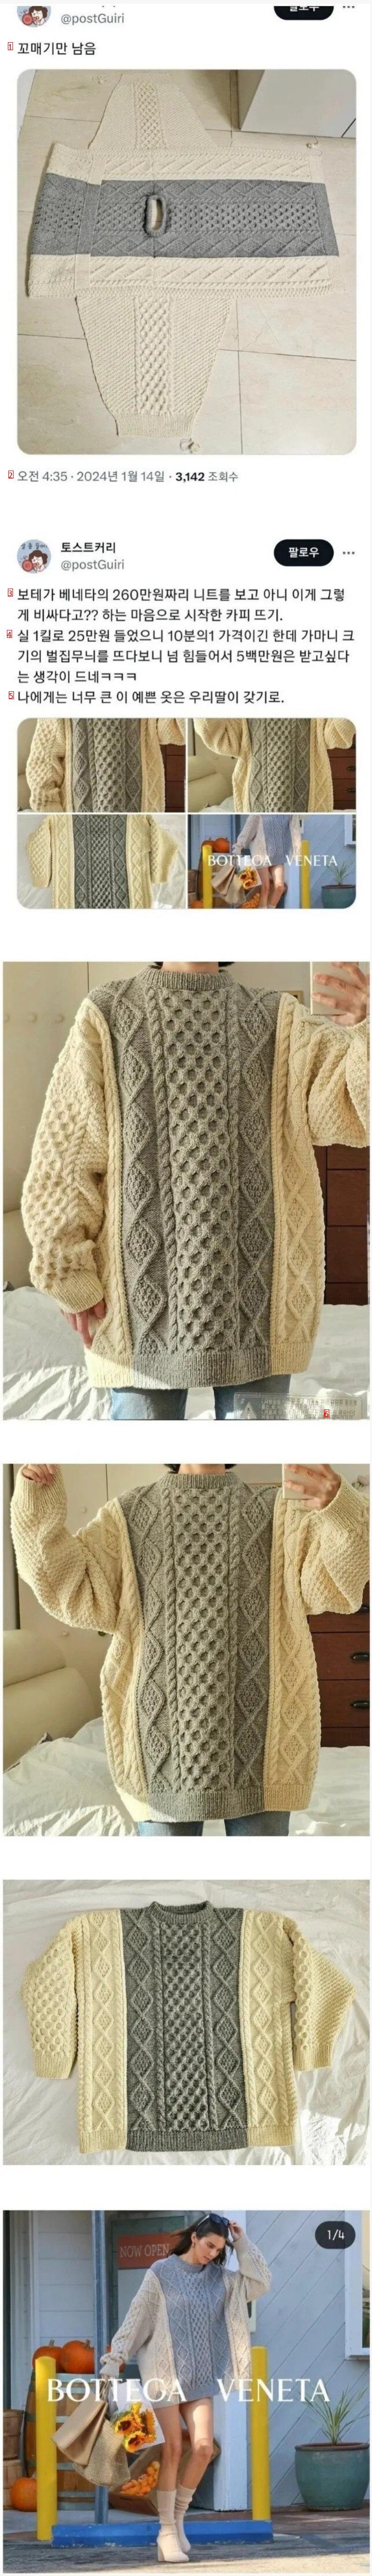 Mom who made a 2.6 million won knit by herself, saying it's expensive